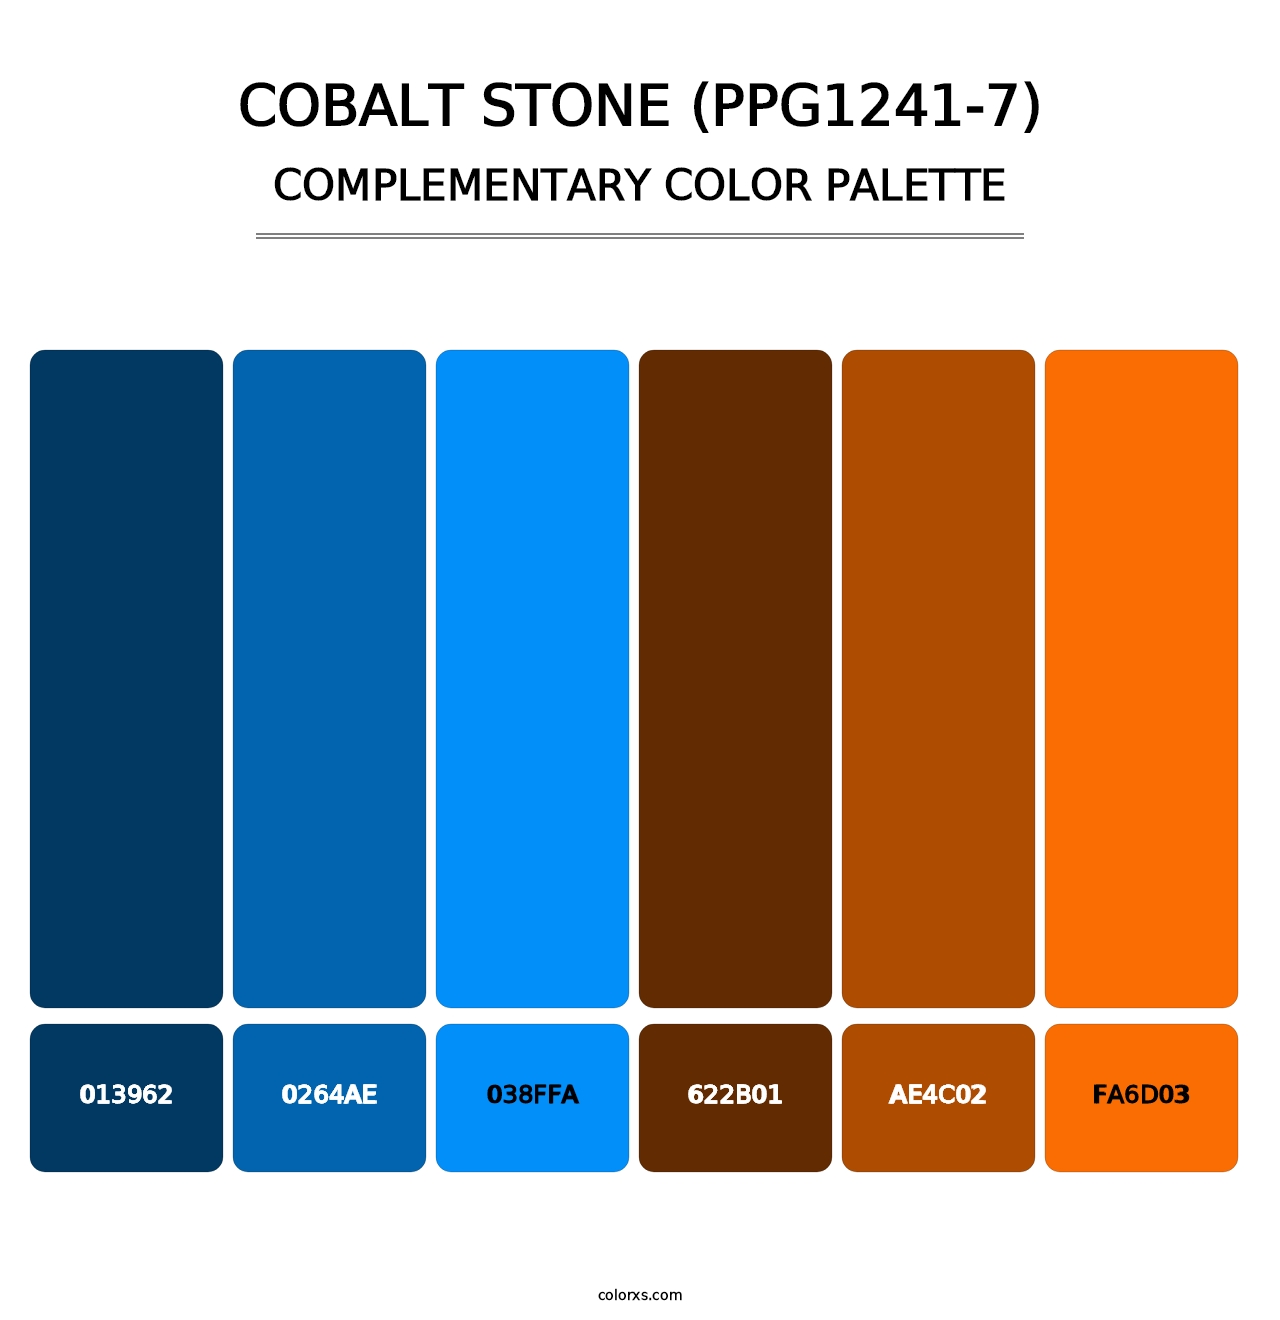 Cobalt Stone (PPG1241-7) - Complementary Color Palette